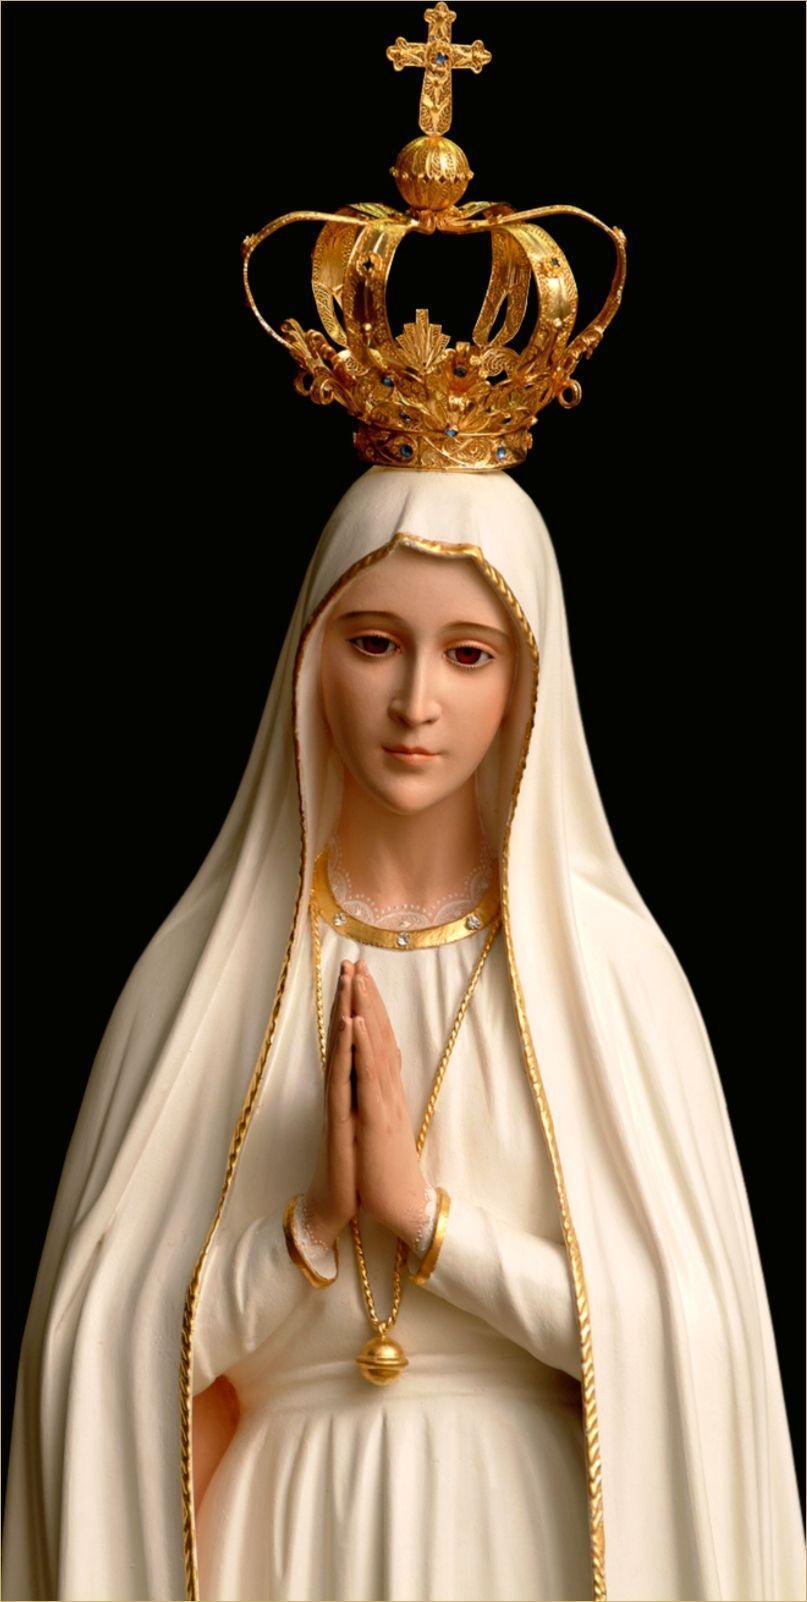 Our Lady Of Fatima Statue Wallpapers.